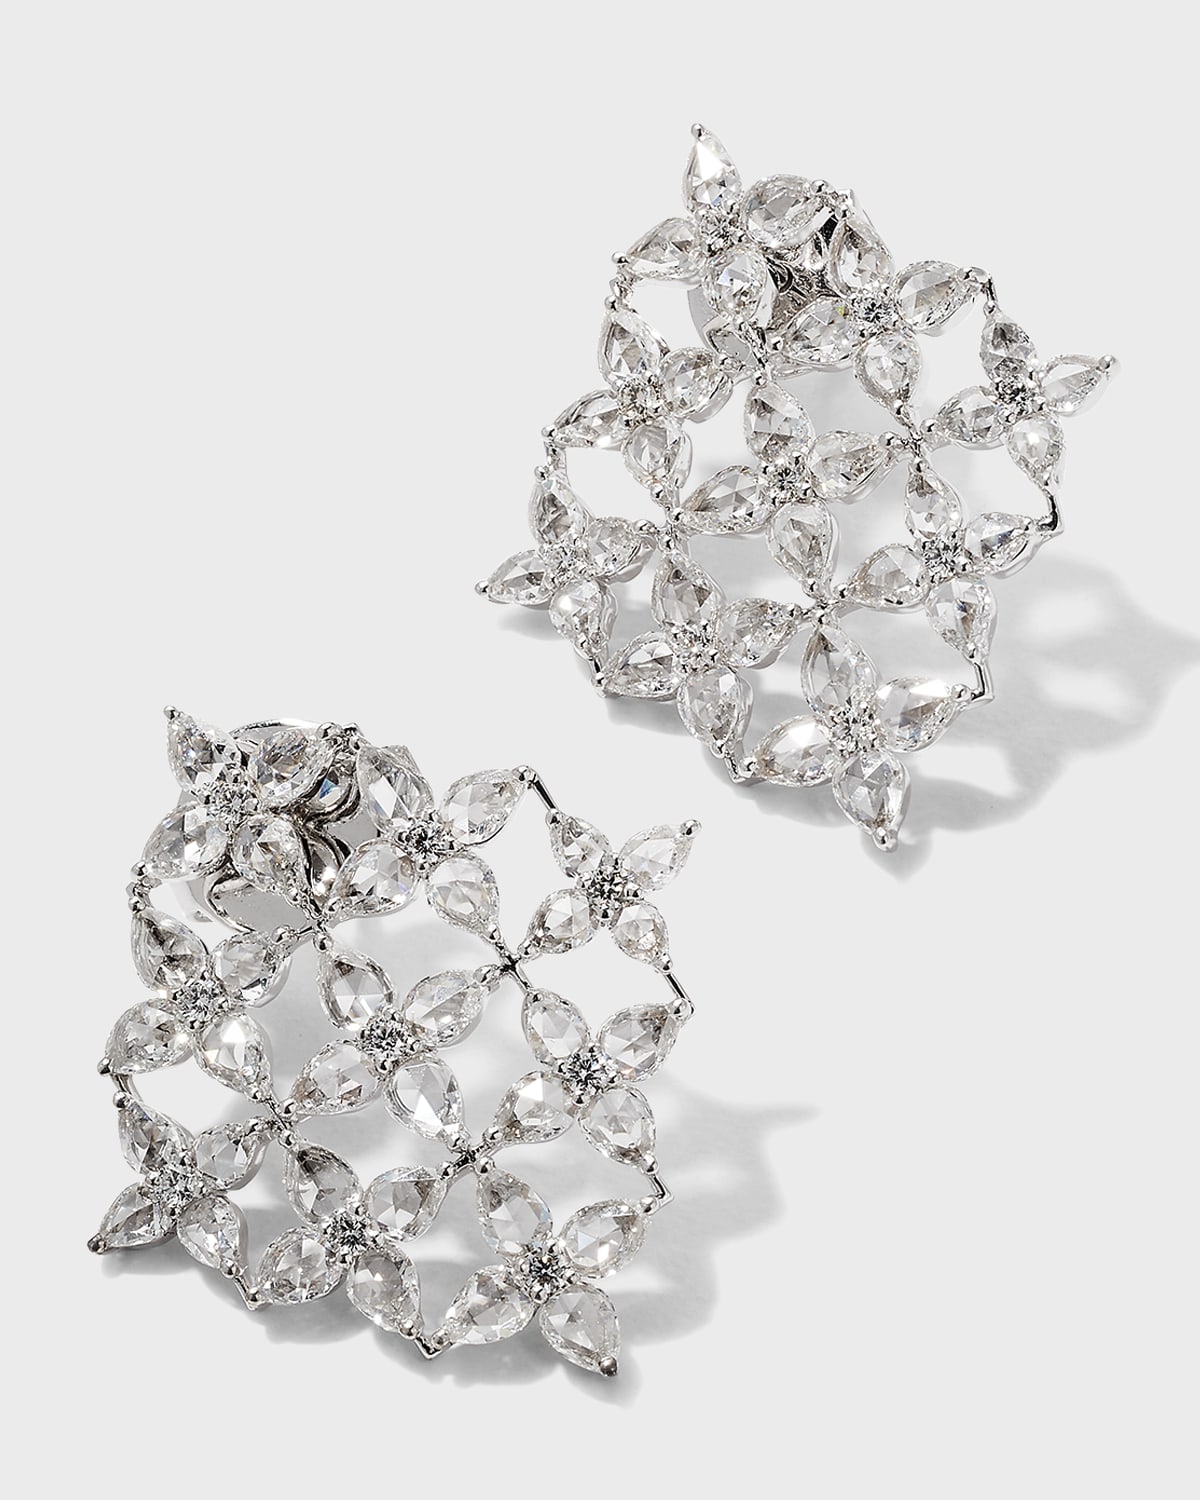 64 Facets White Gold Blossom Motif Earrings With Pear Rose-cut Diamonds